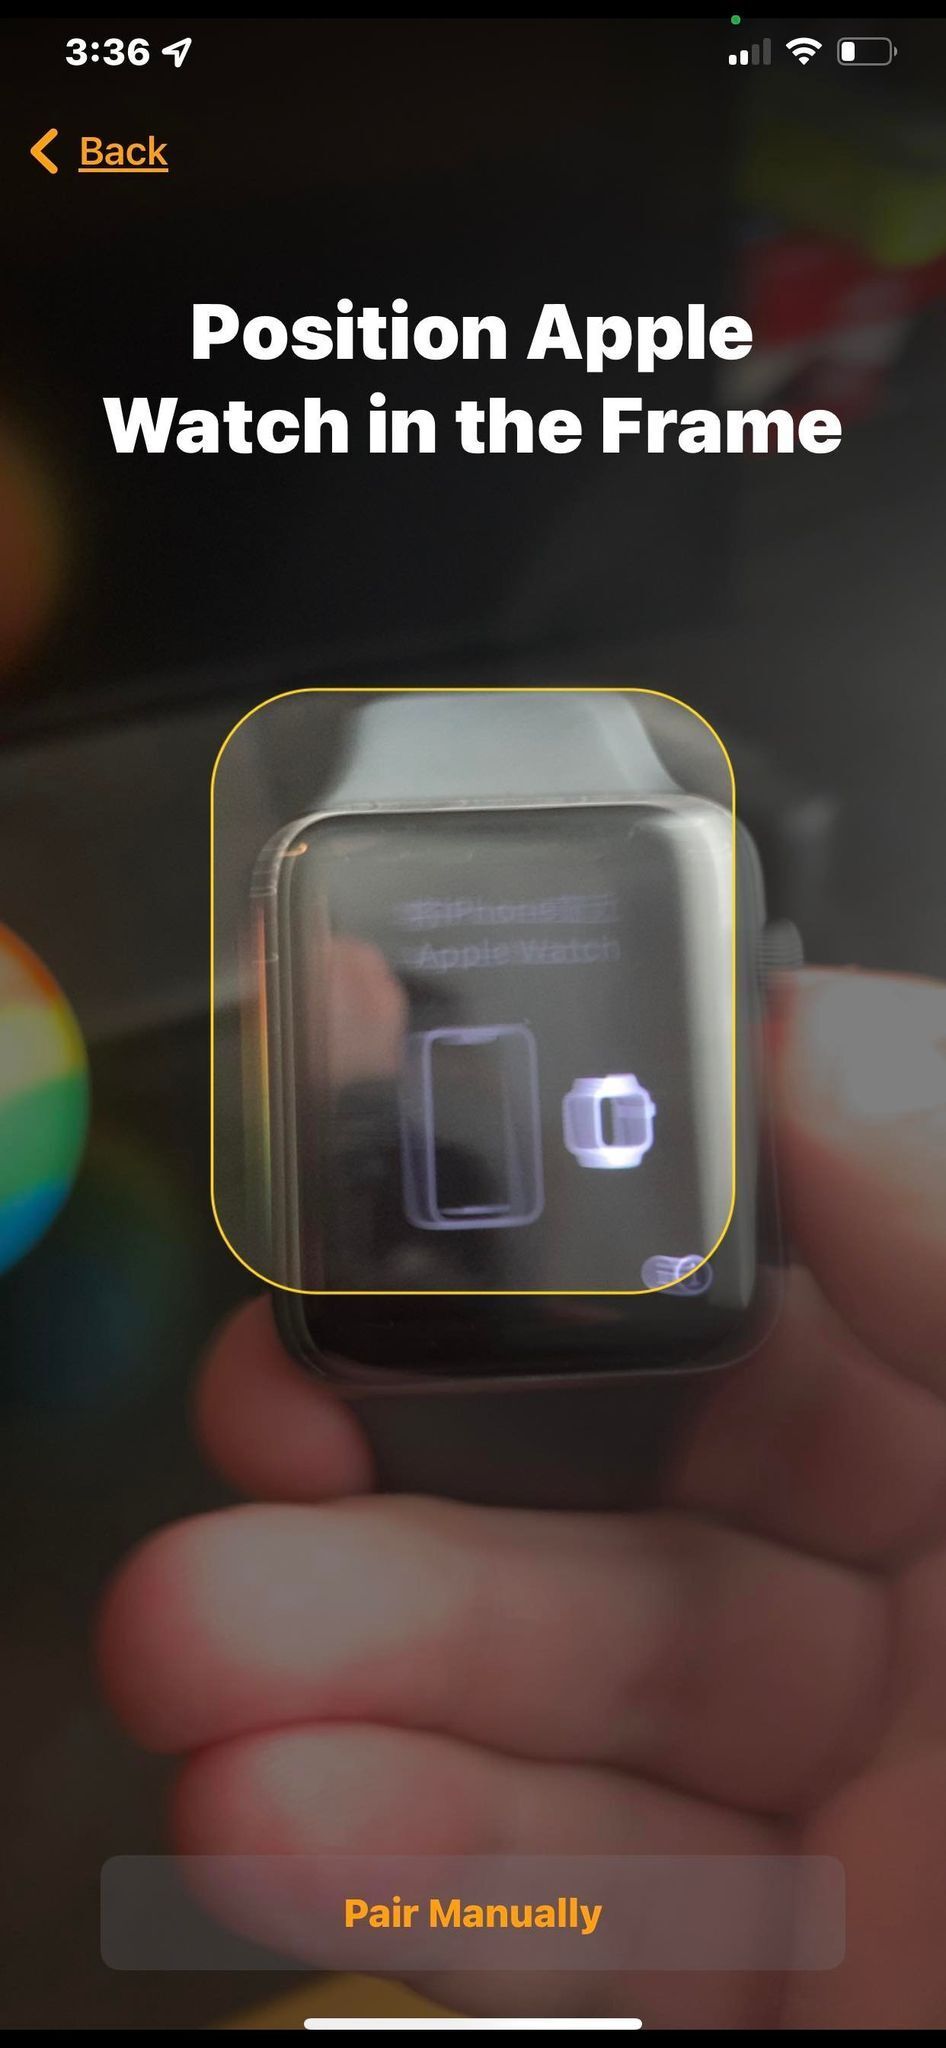 An Apple Watch positioned in a frame for pairing in the Apple Watch app